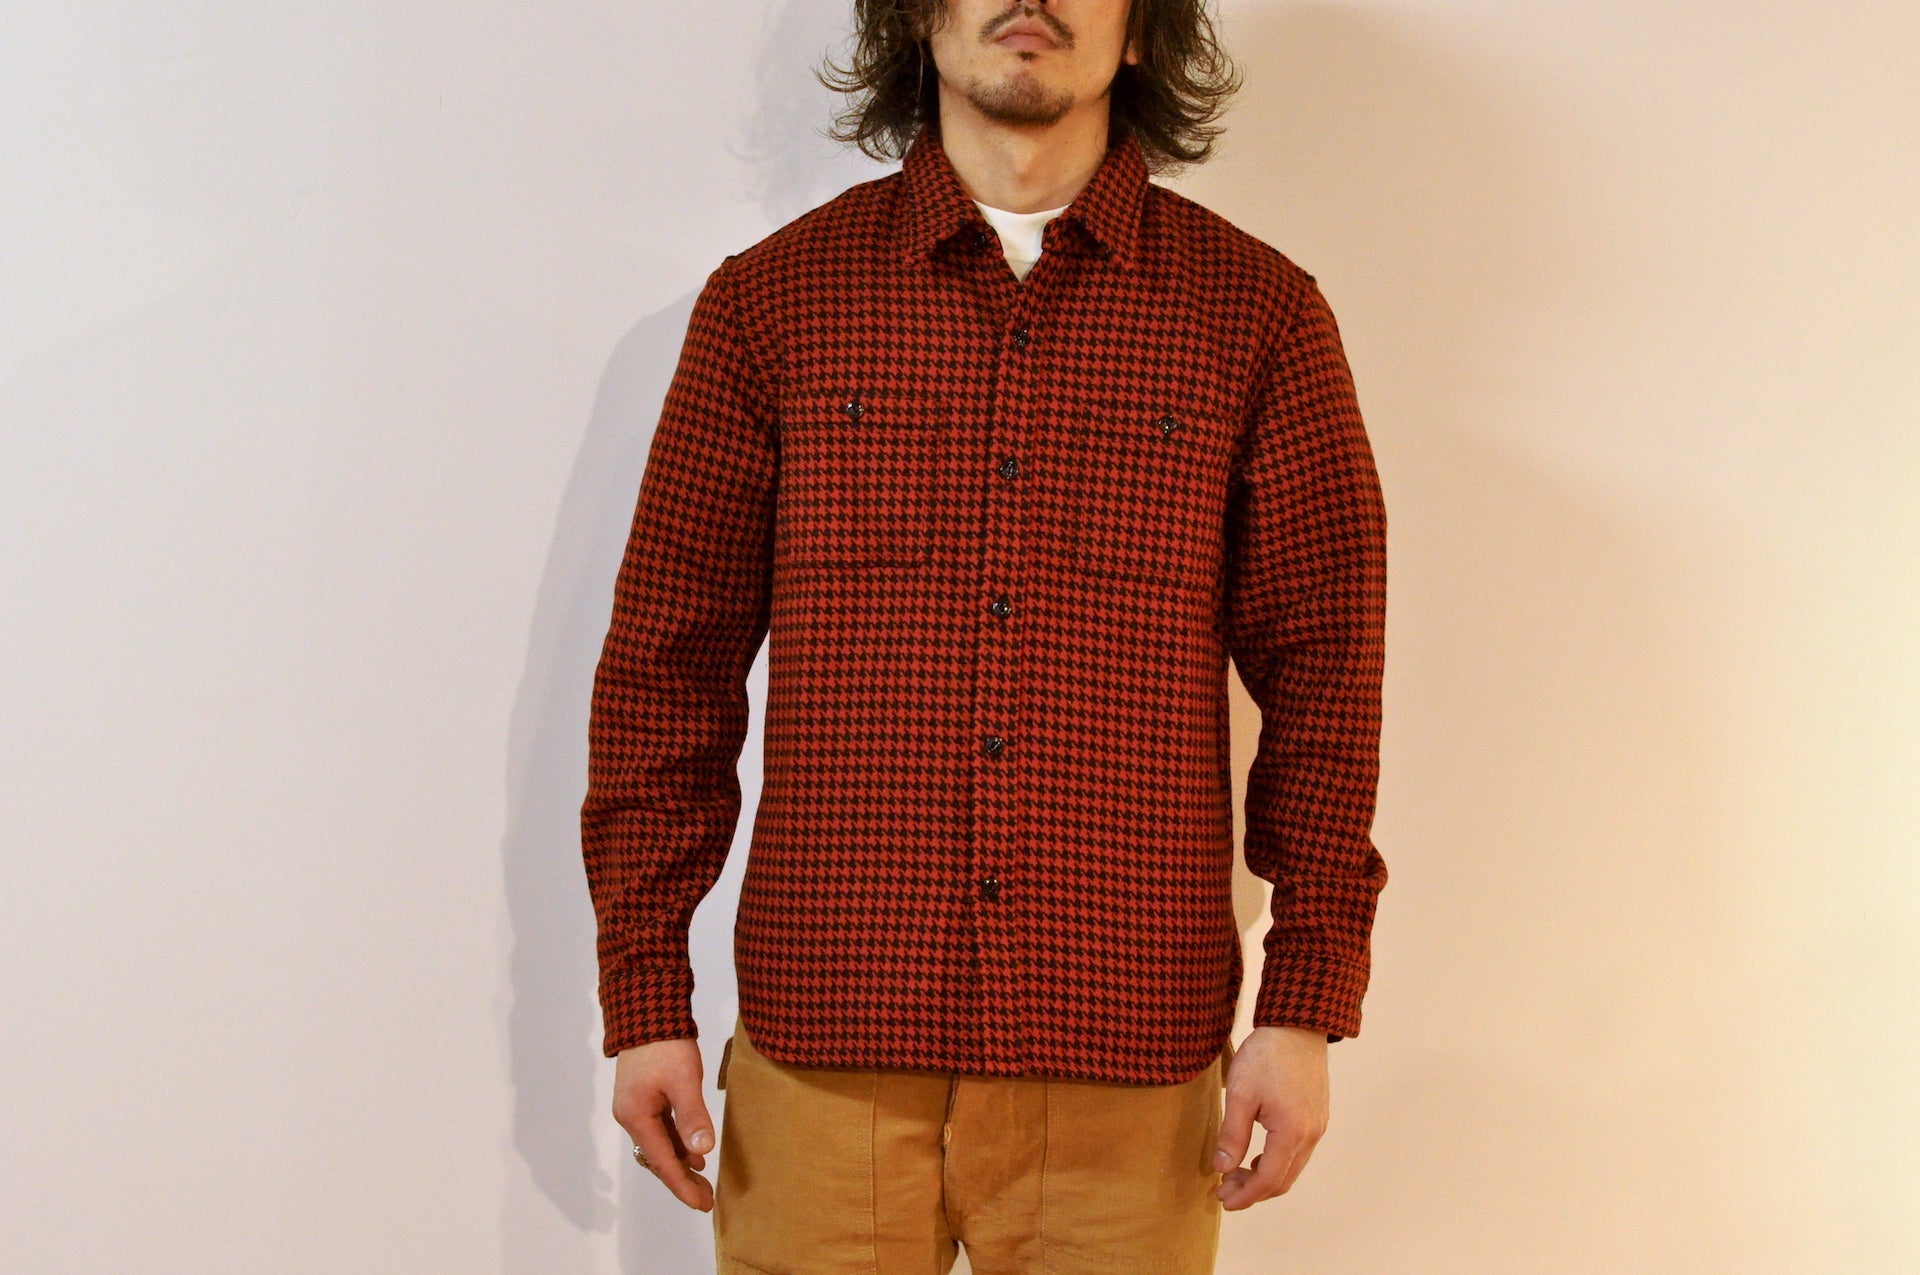 The Flat Head Heavyweight Houndstooth Selvage Flannel Workshirt (Burgundy)